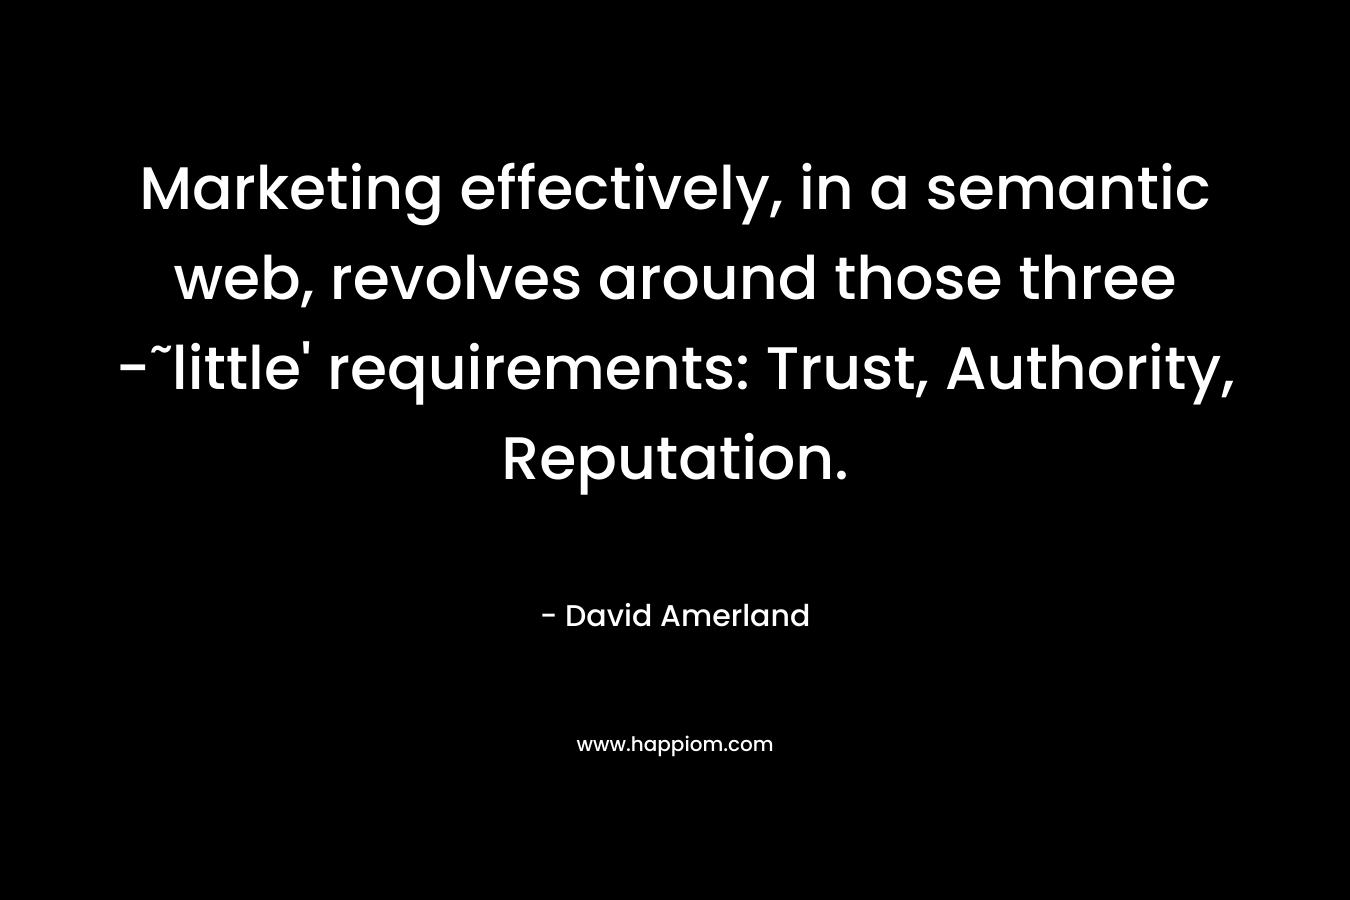 Marketing effectively, in a semantic web, revolves around those three -˜little’ requirements: Trust, Authority, Reputation. – David Amerland